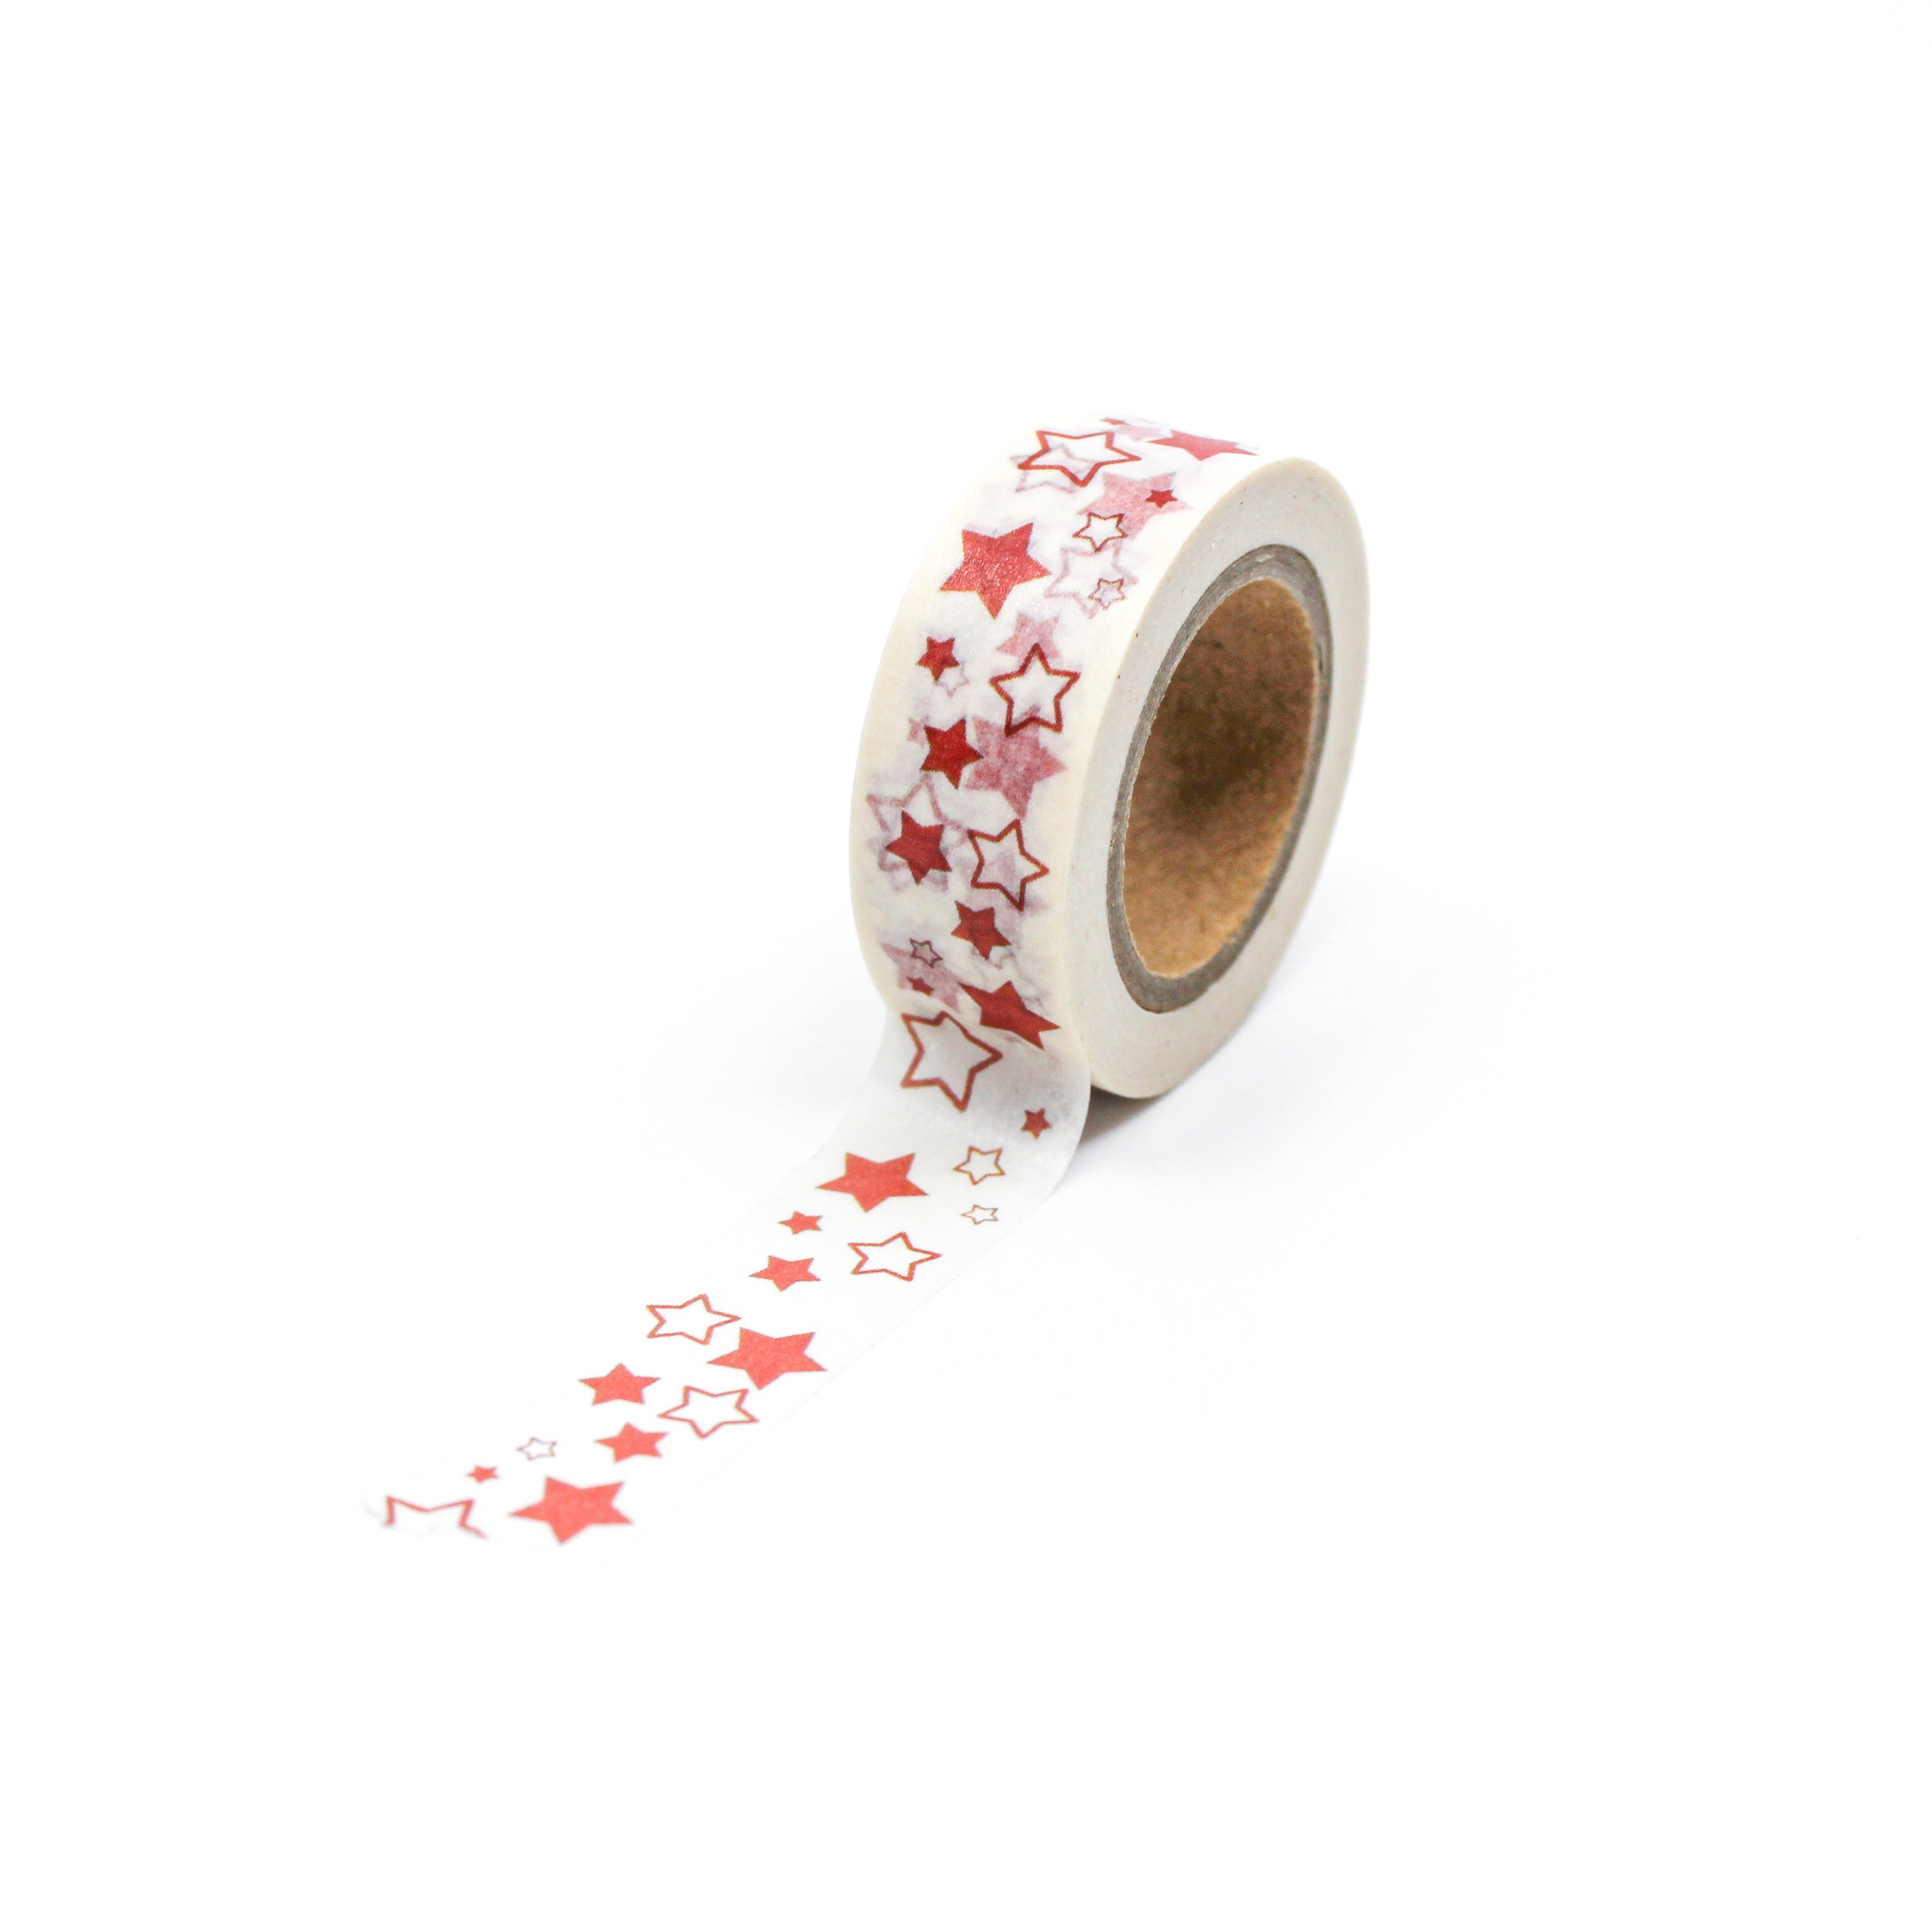 This is a full pattern repeat view of red and white tiny stars washi tape from BBB Supplies Craft Shop